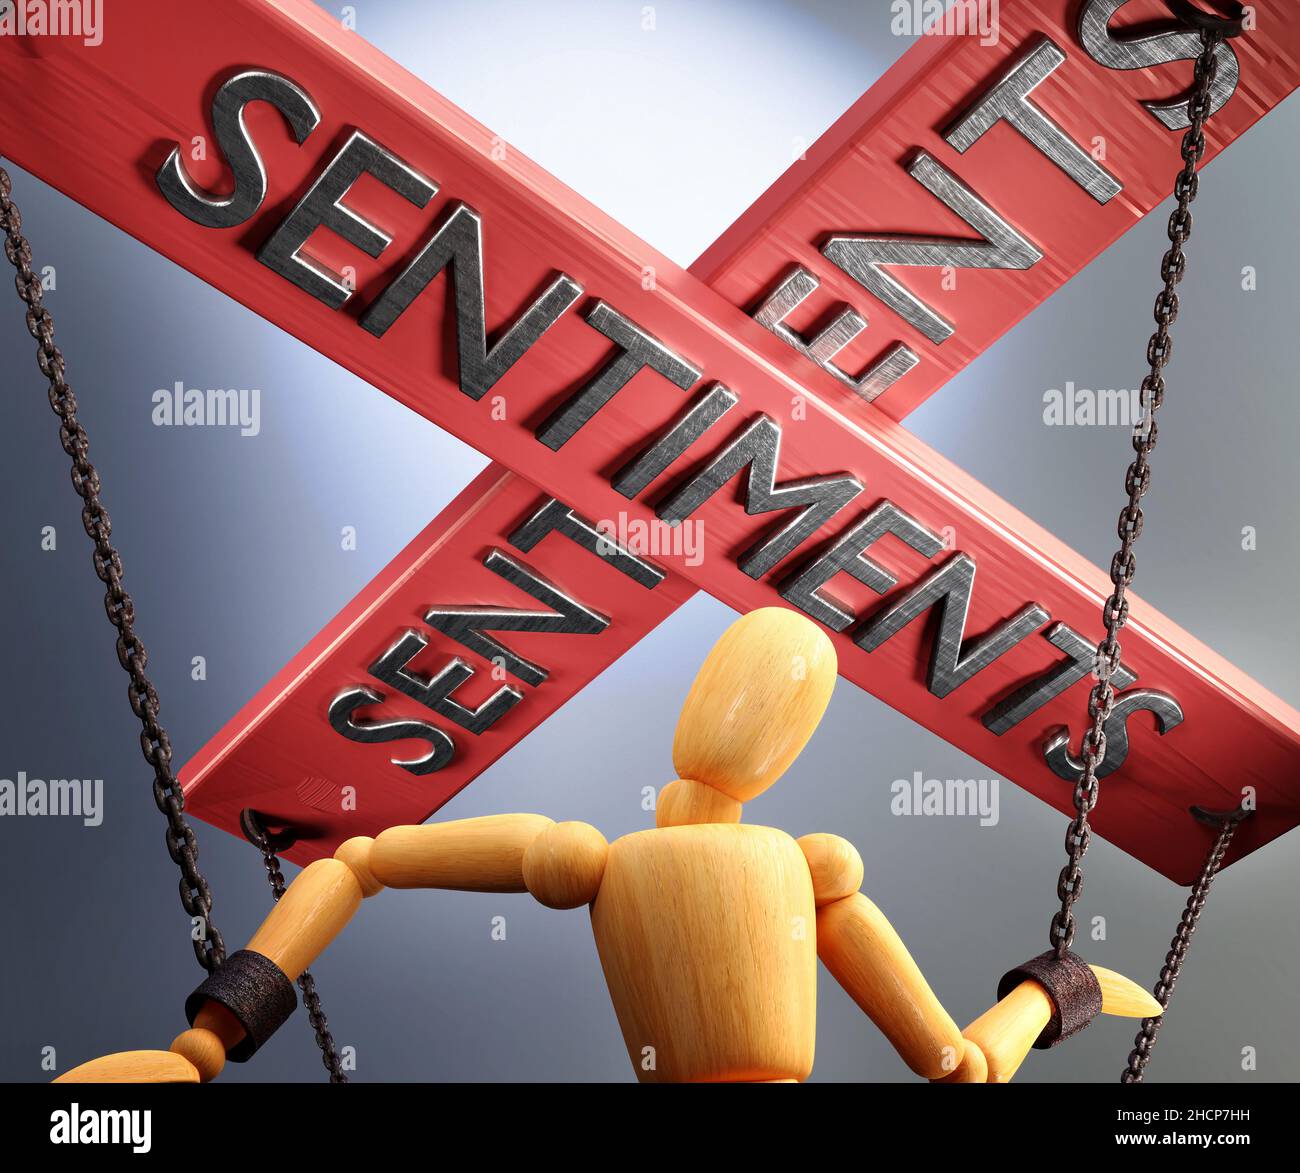 Sentiments control, power, influence and manipulation symbolized by control bar with word Sentiments pulling the strings (chains) of a wooden puppet, Stock Photo